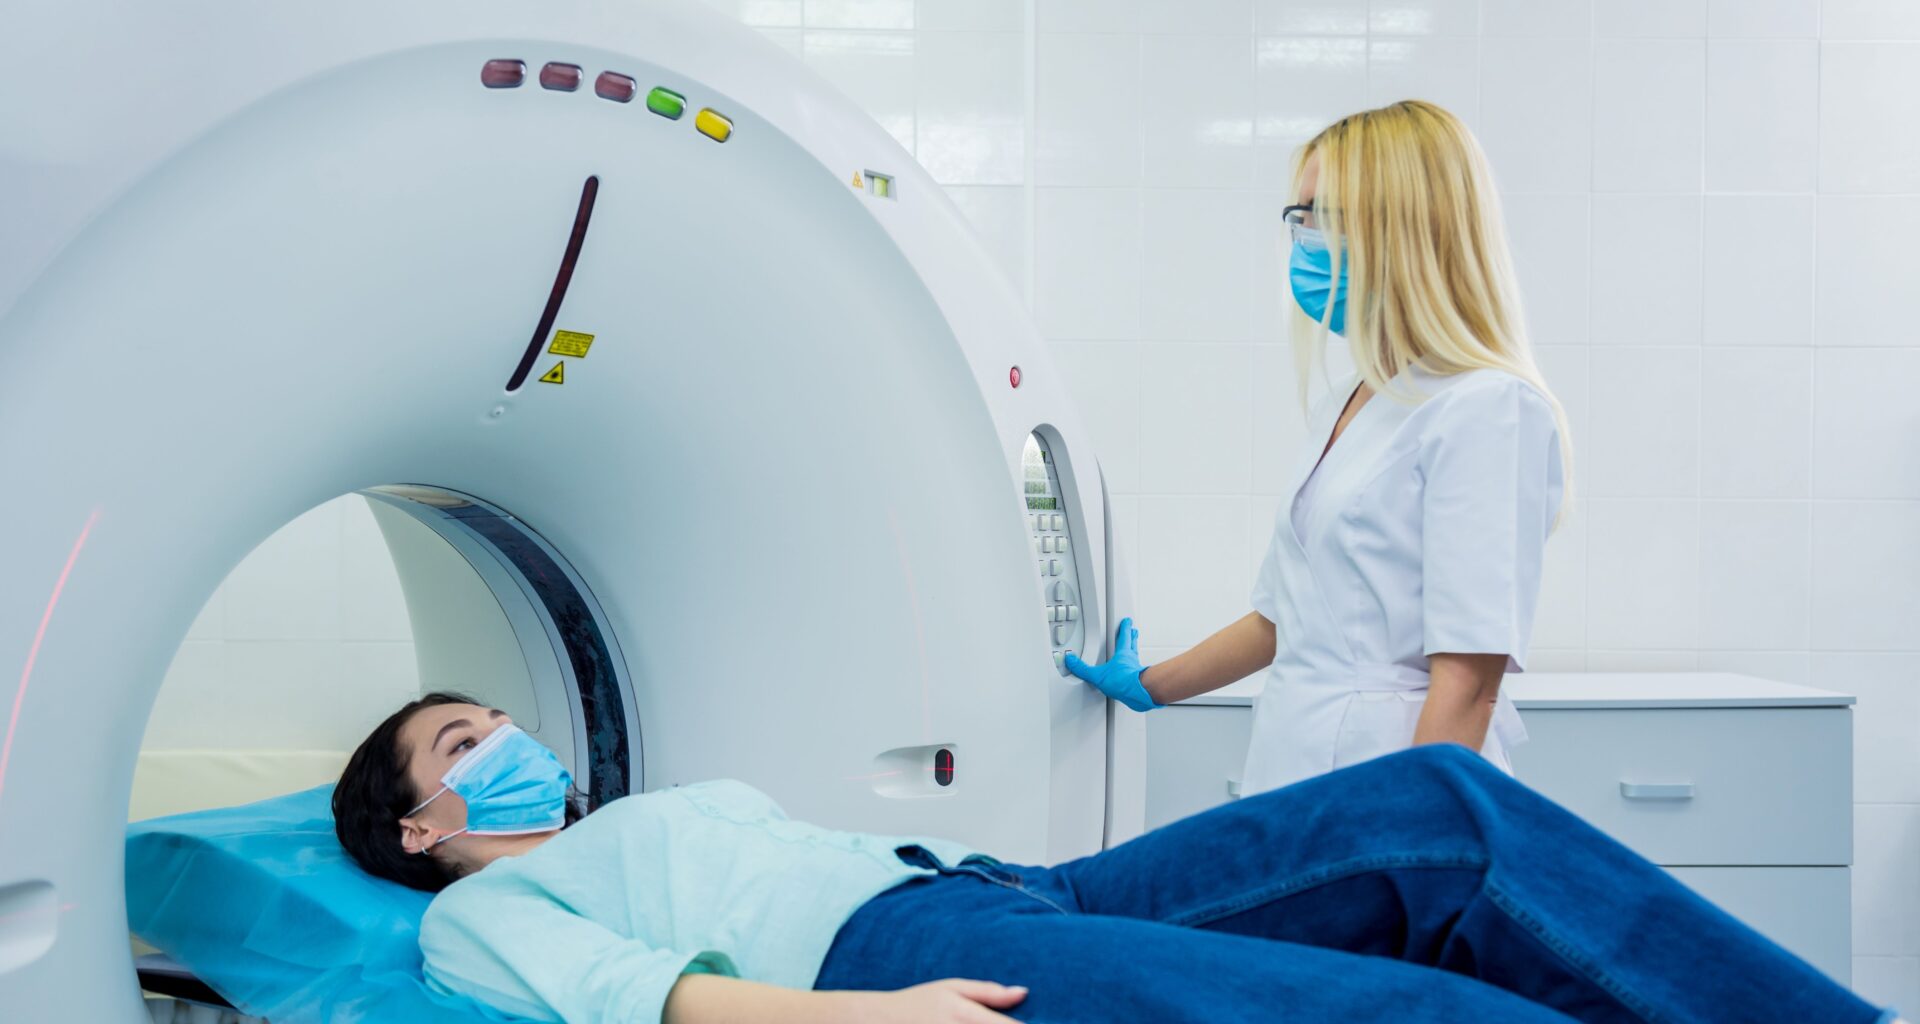 How Much Does A Cat Scan Cost Without Insurance?